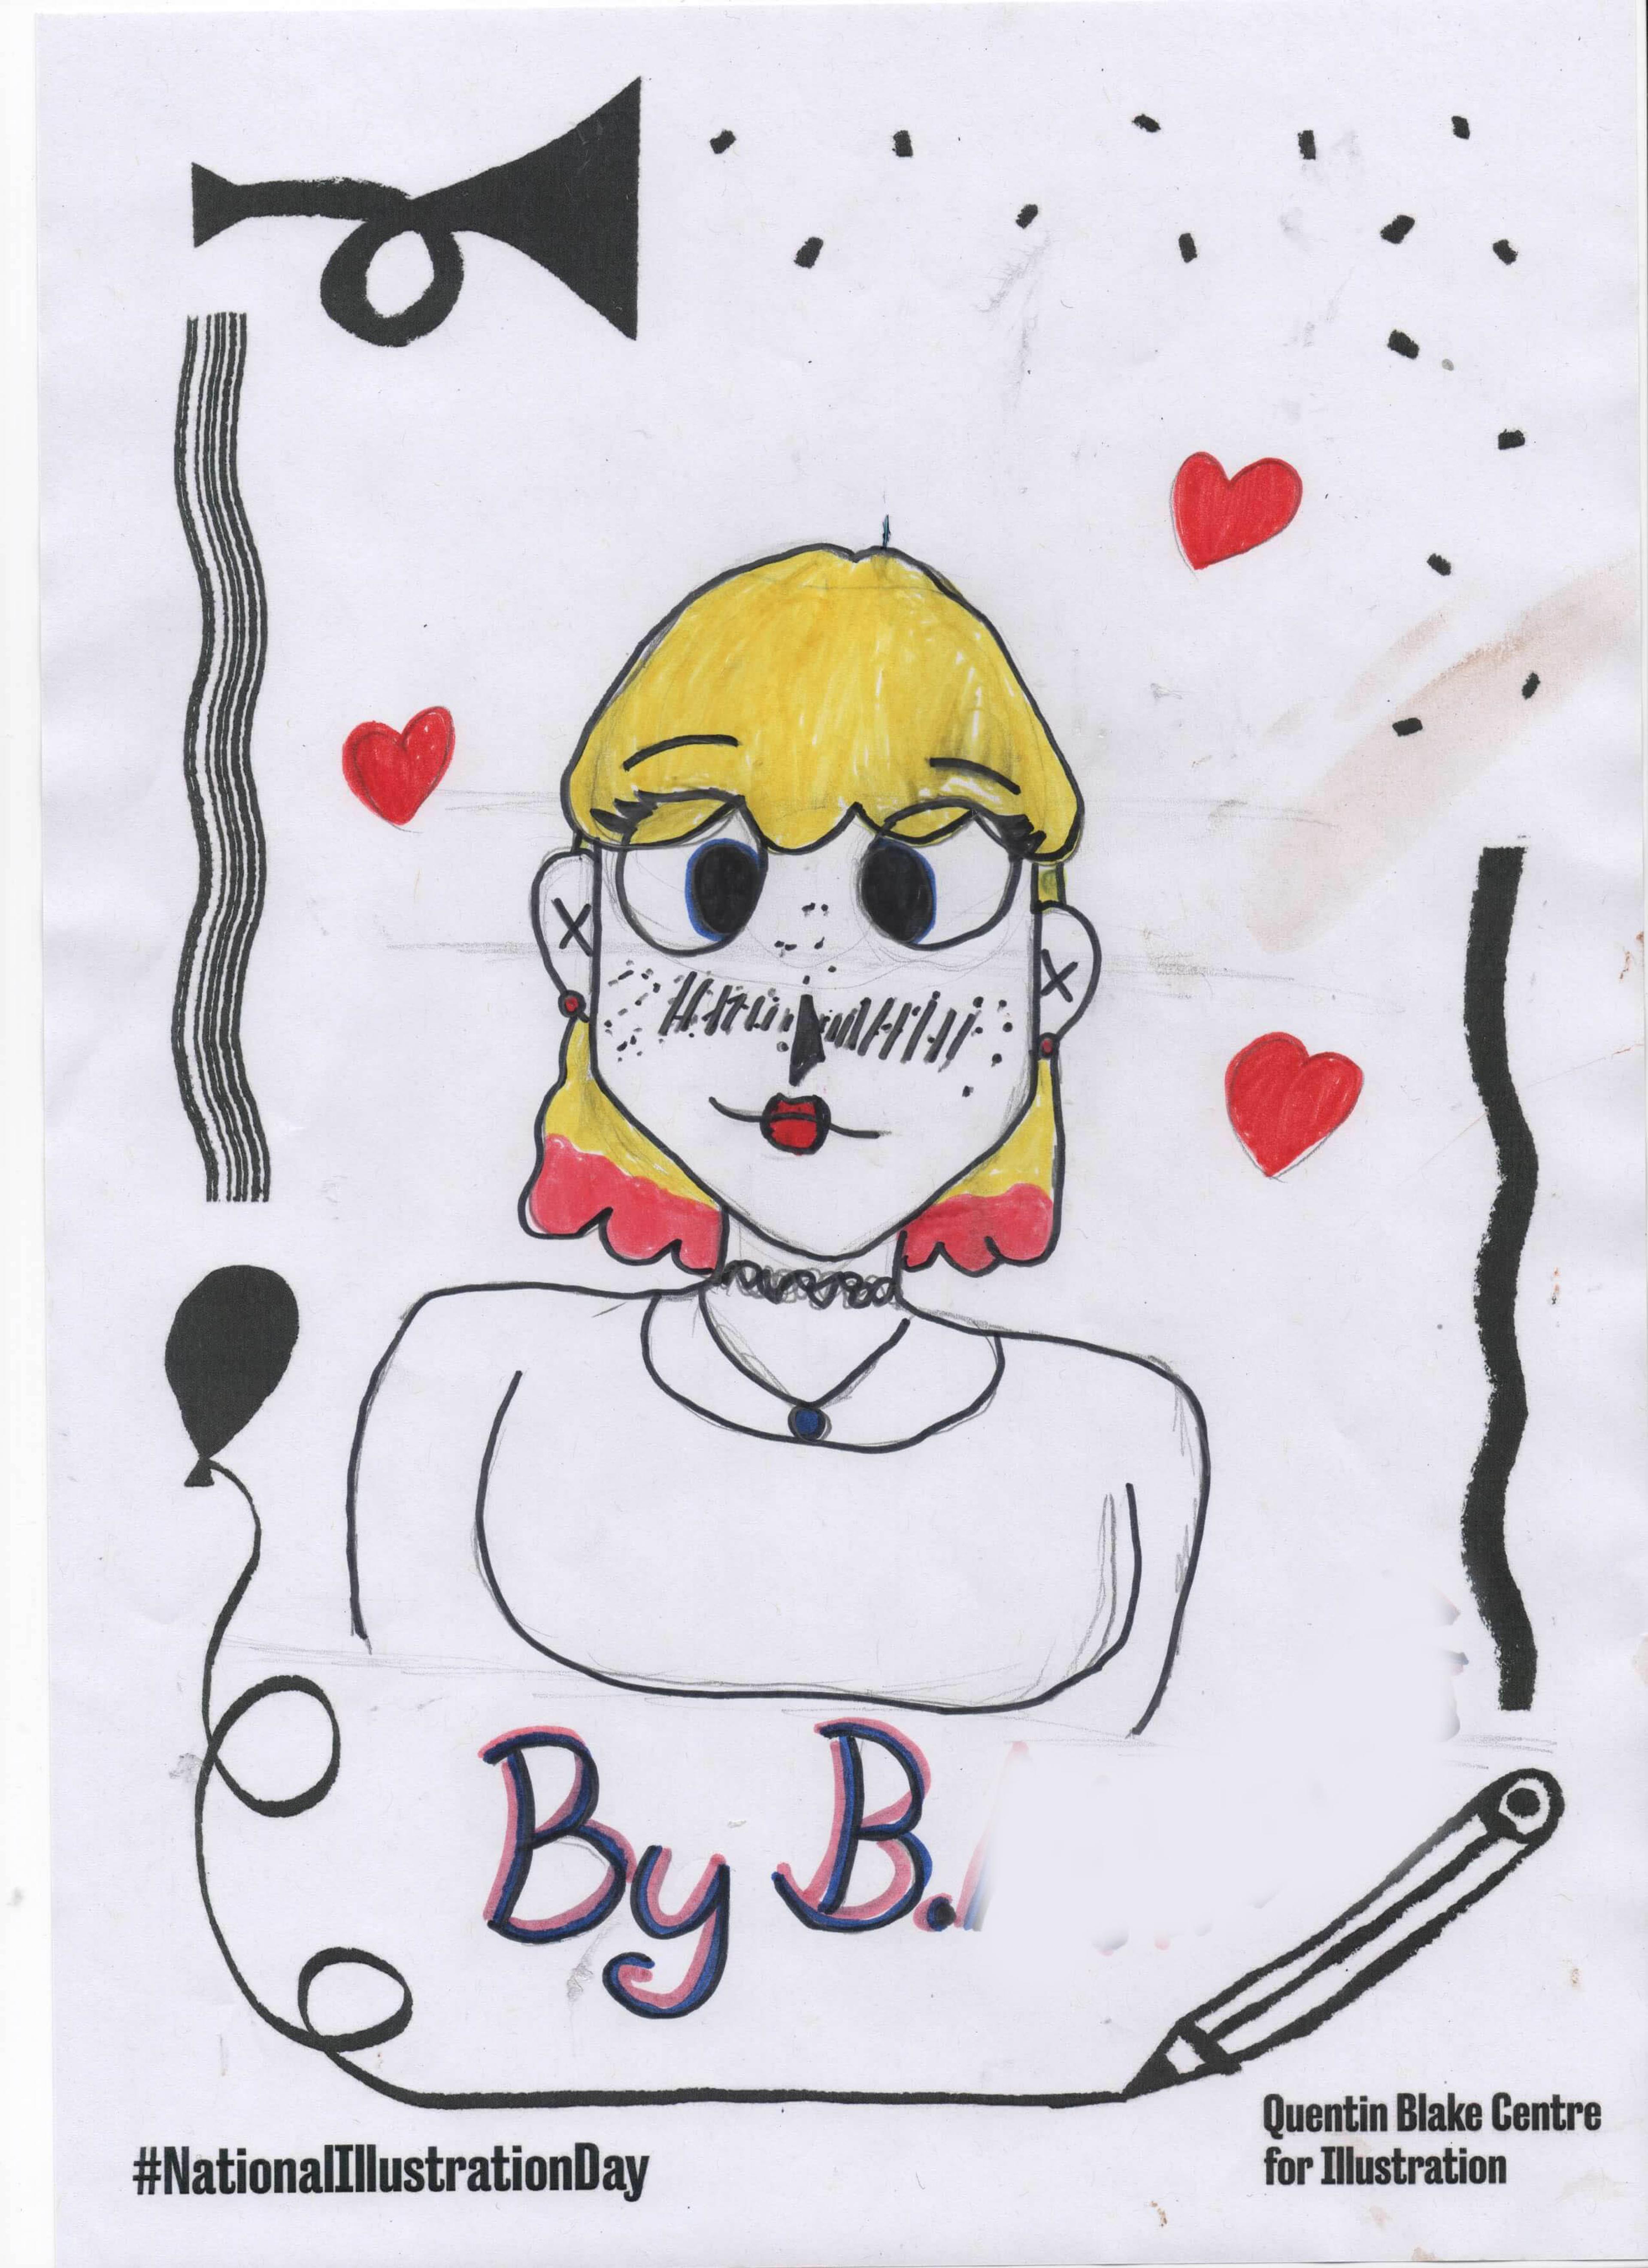 Drawing of a cute cartoon with big, crossed eyes and blond hair. It's signed "by B." in big, curly letters.